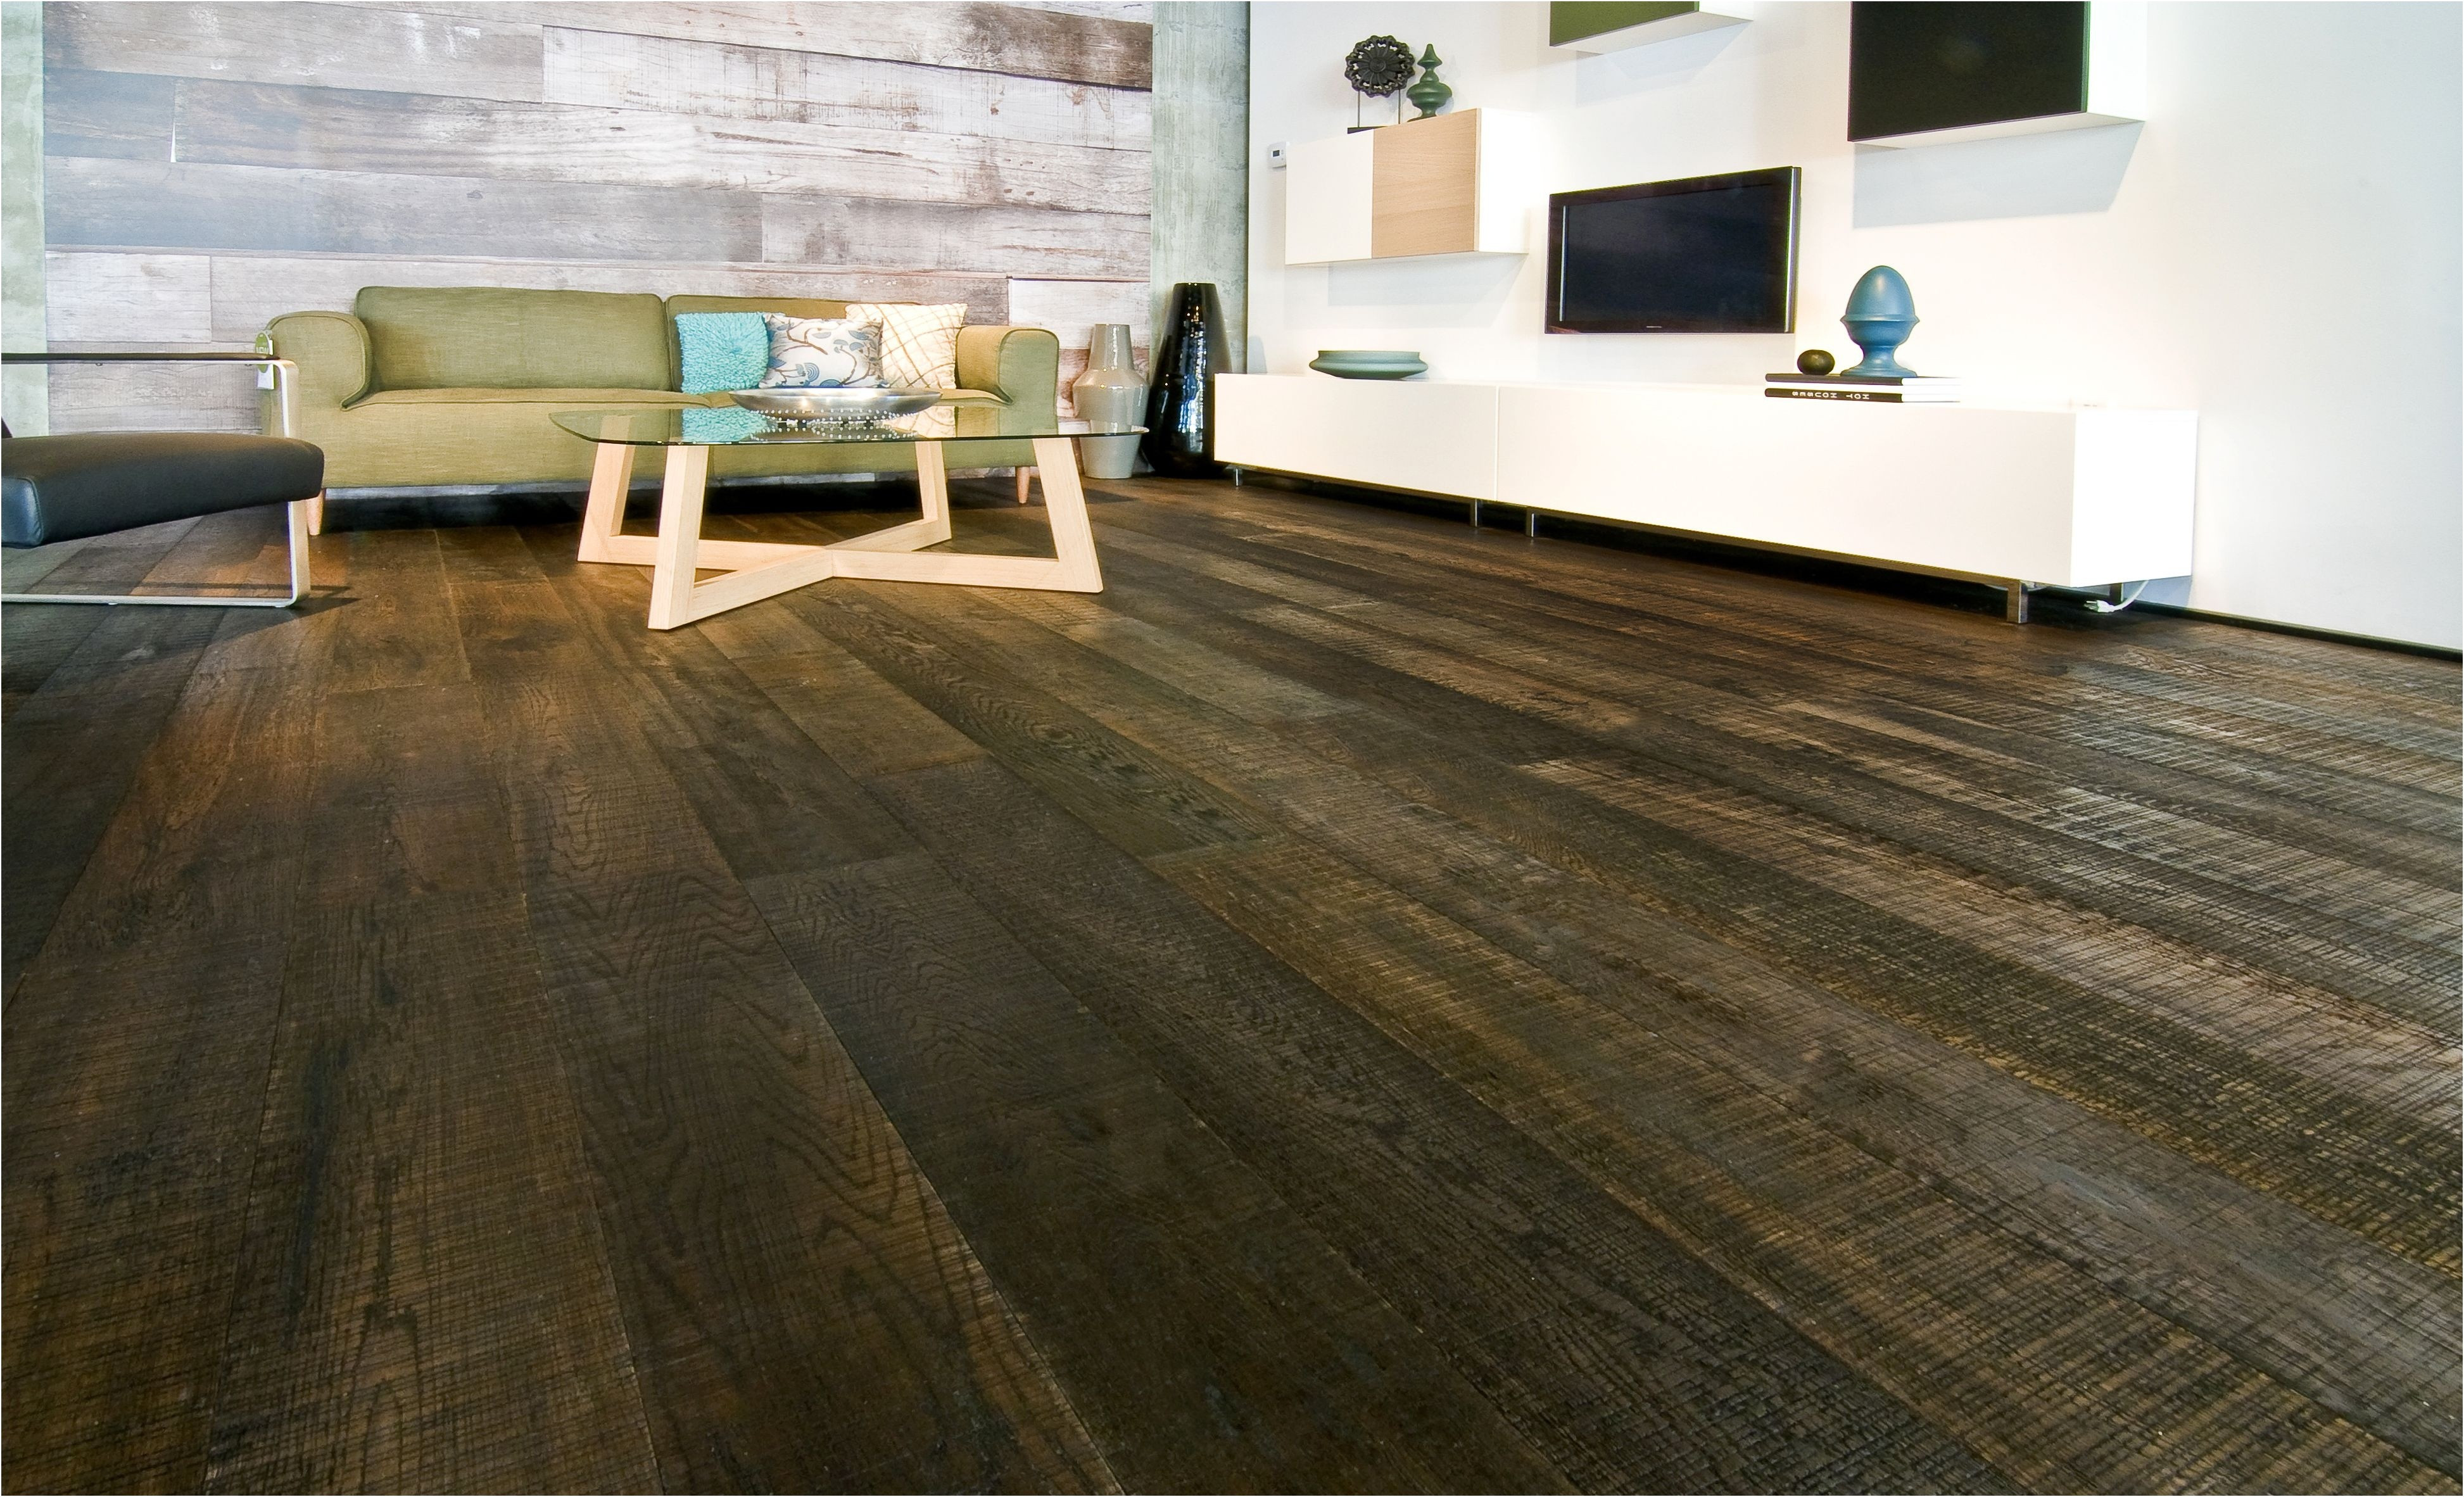 30 Lovable Unfinished Hardwood Flooring Suppliers 2024 free download unfinished hardwood flooring suppliers of 19 new cheapest hardwood flooring photograph dizpos com with regard to cheapest hardwood flooring fresh wholesale hardwood flooring nj where to buy 